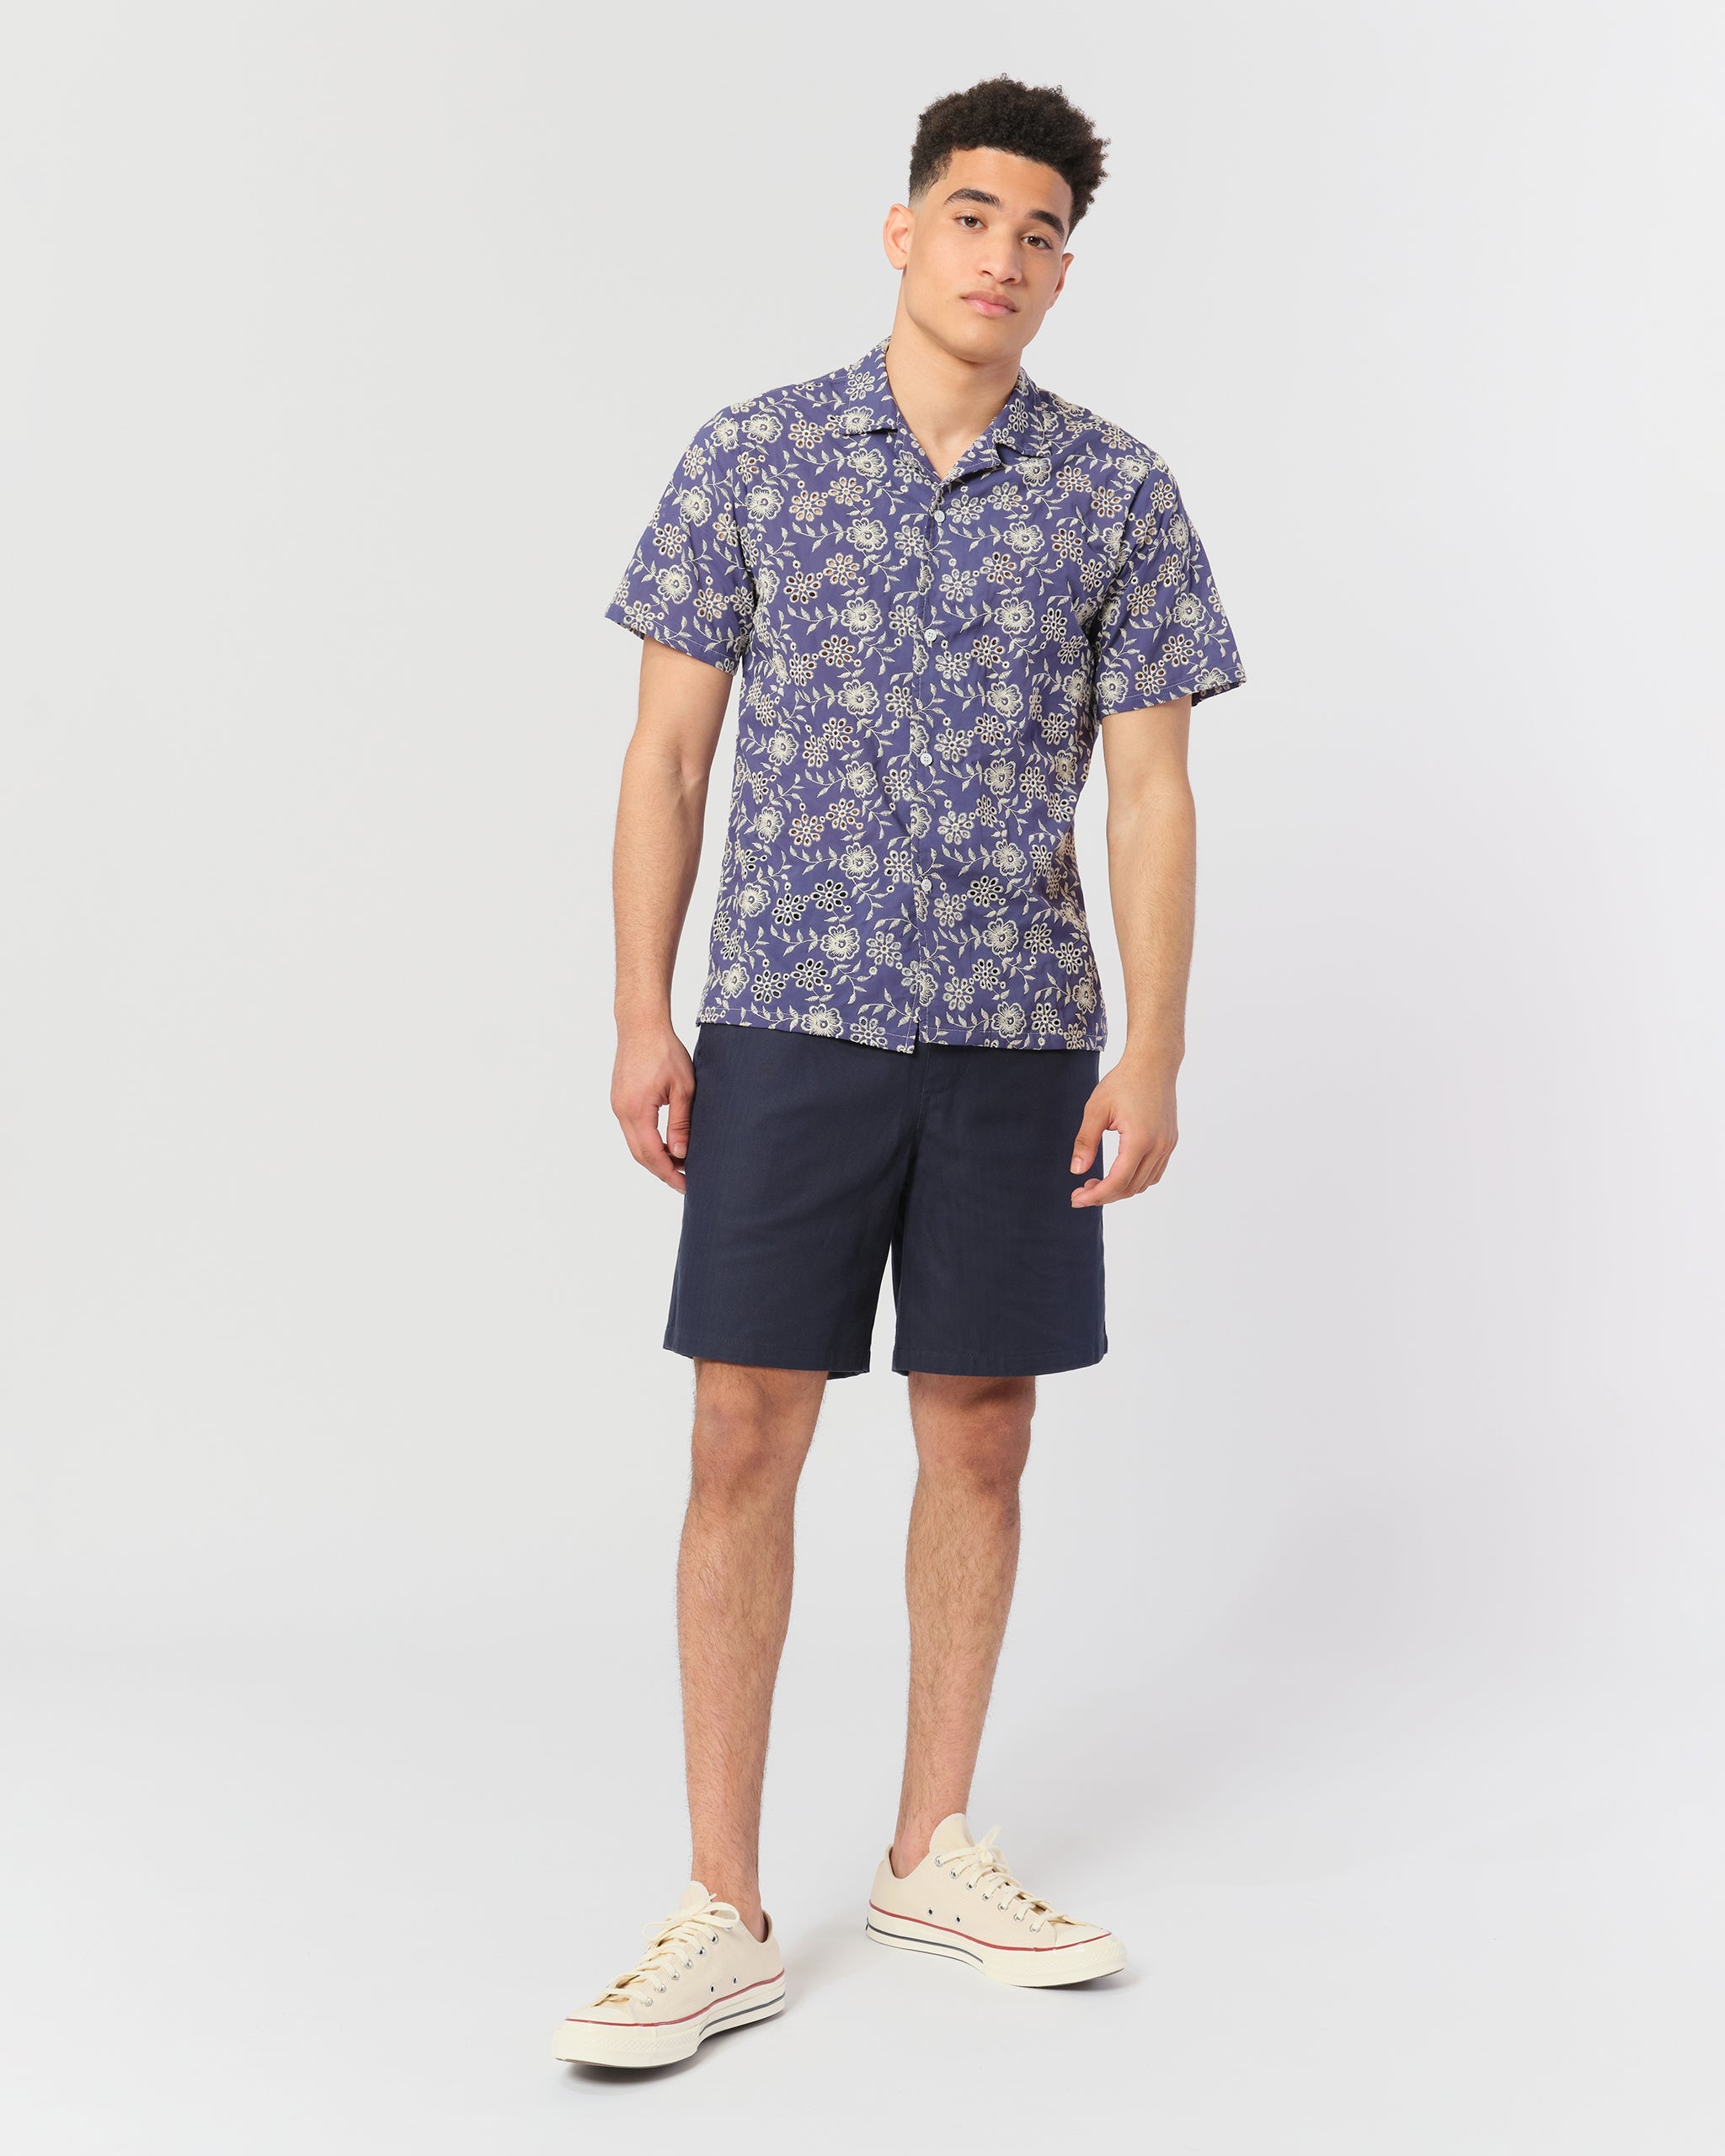 model wearing Blue camp shirt with an embroidered floral pattern